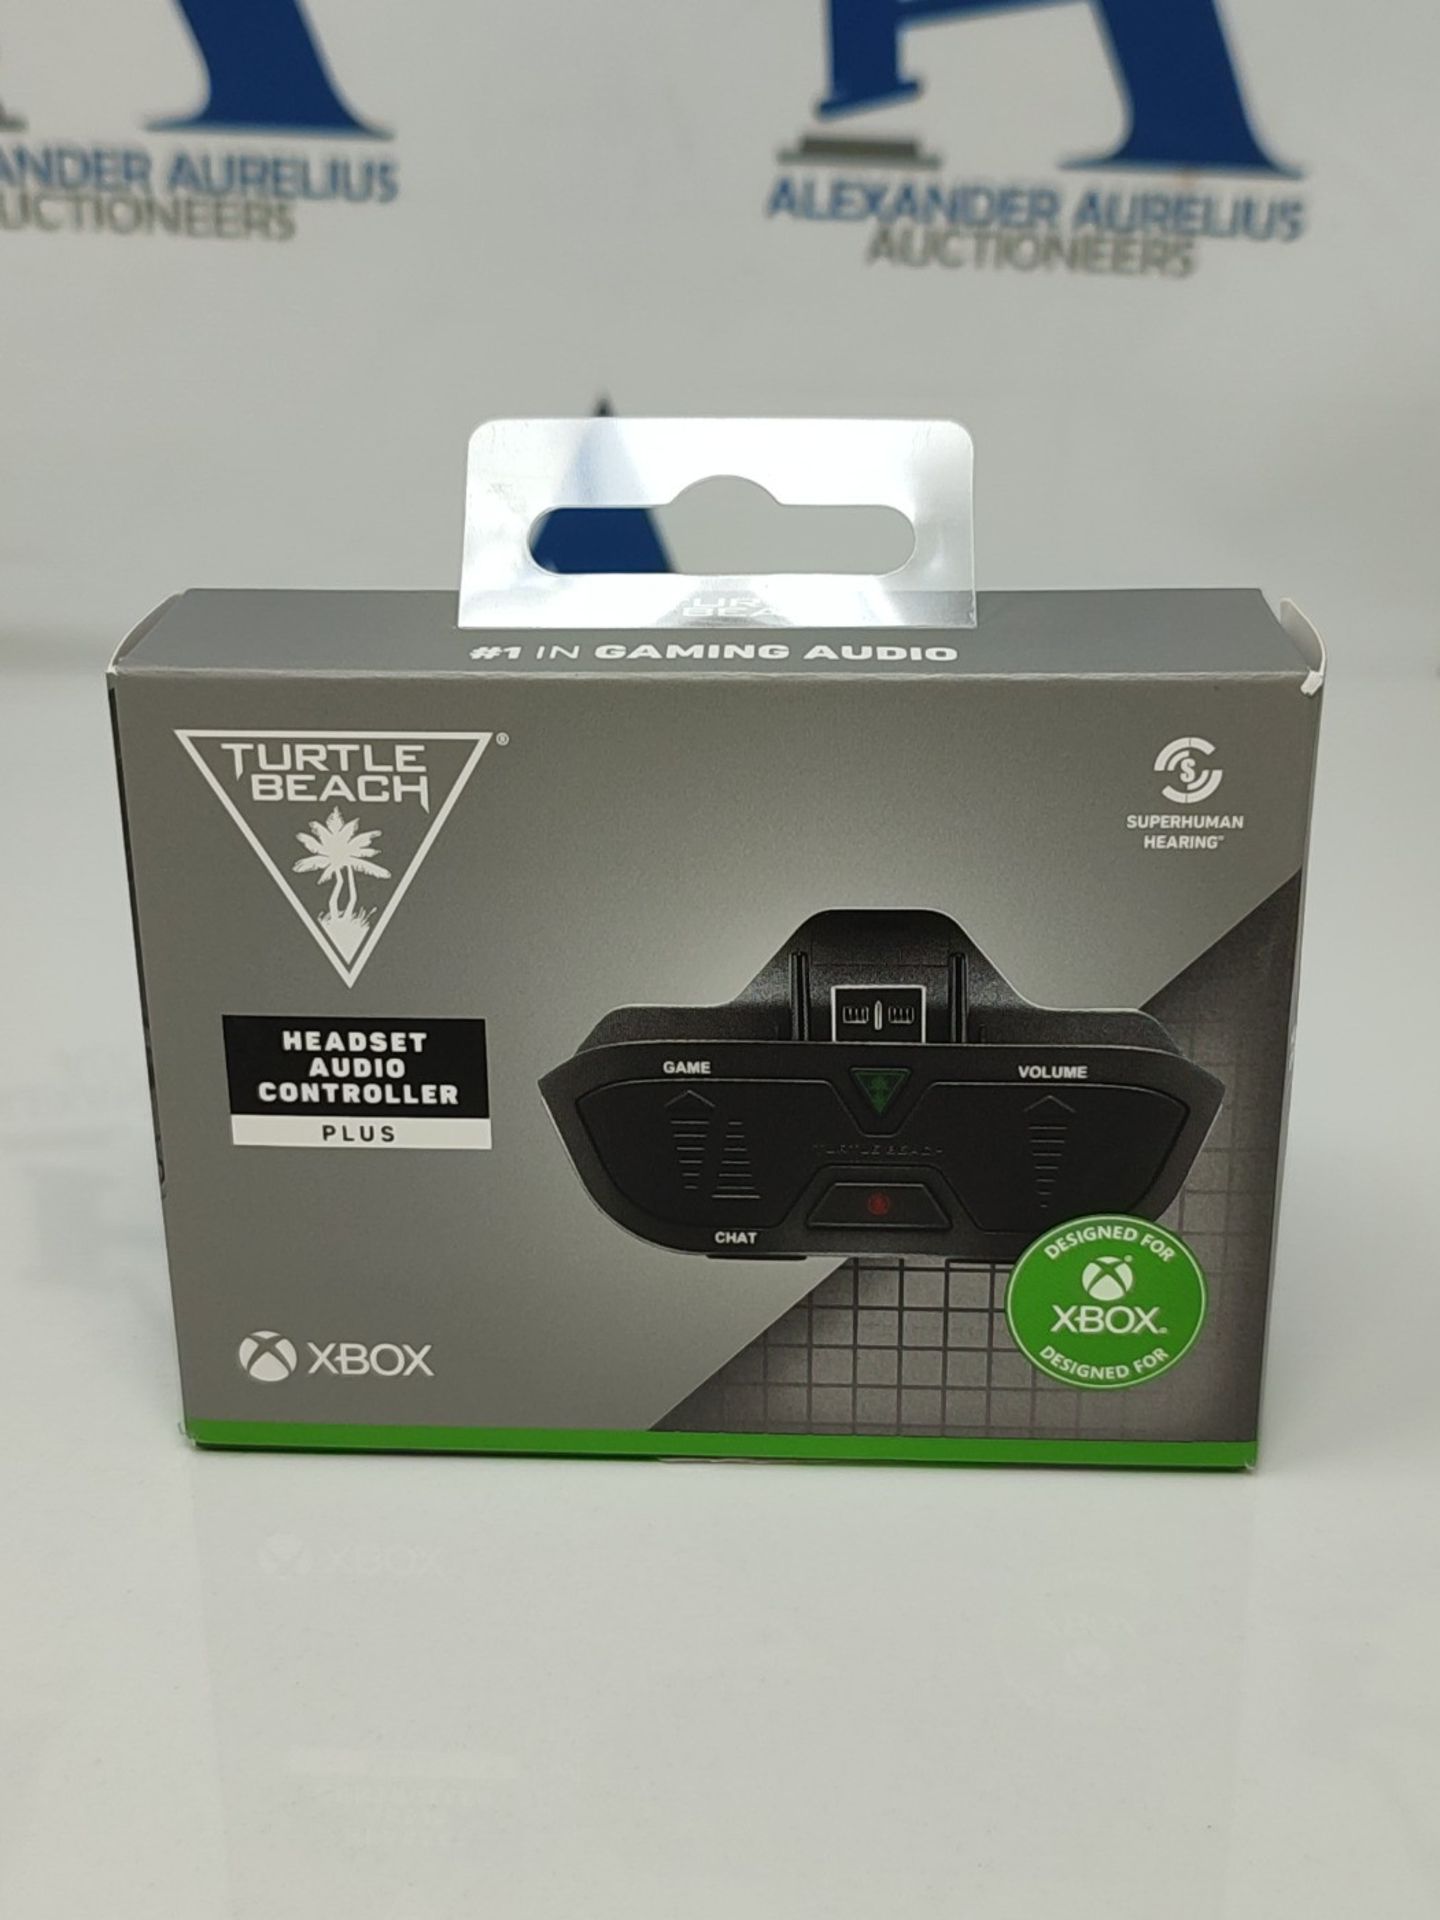 Turtle Beach - Ear Force Headset Audio Controller Plus - Superhuman Hearing - Xbox One - Image 2 of 3